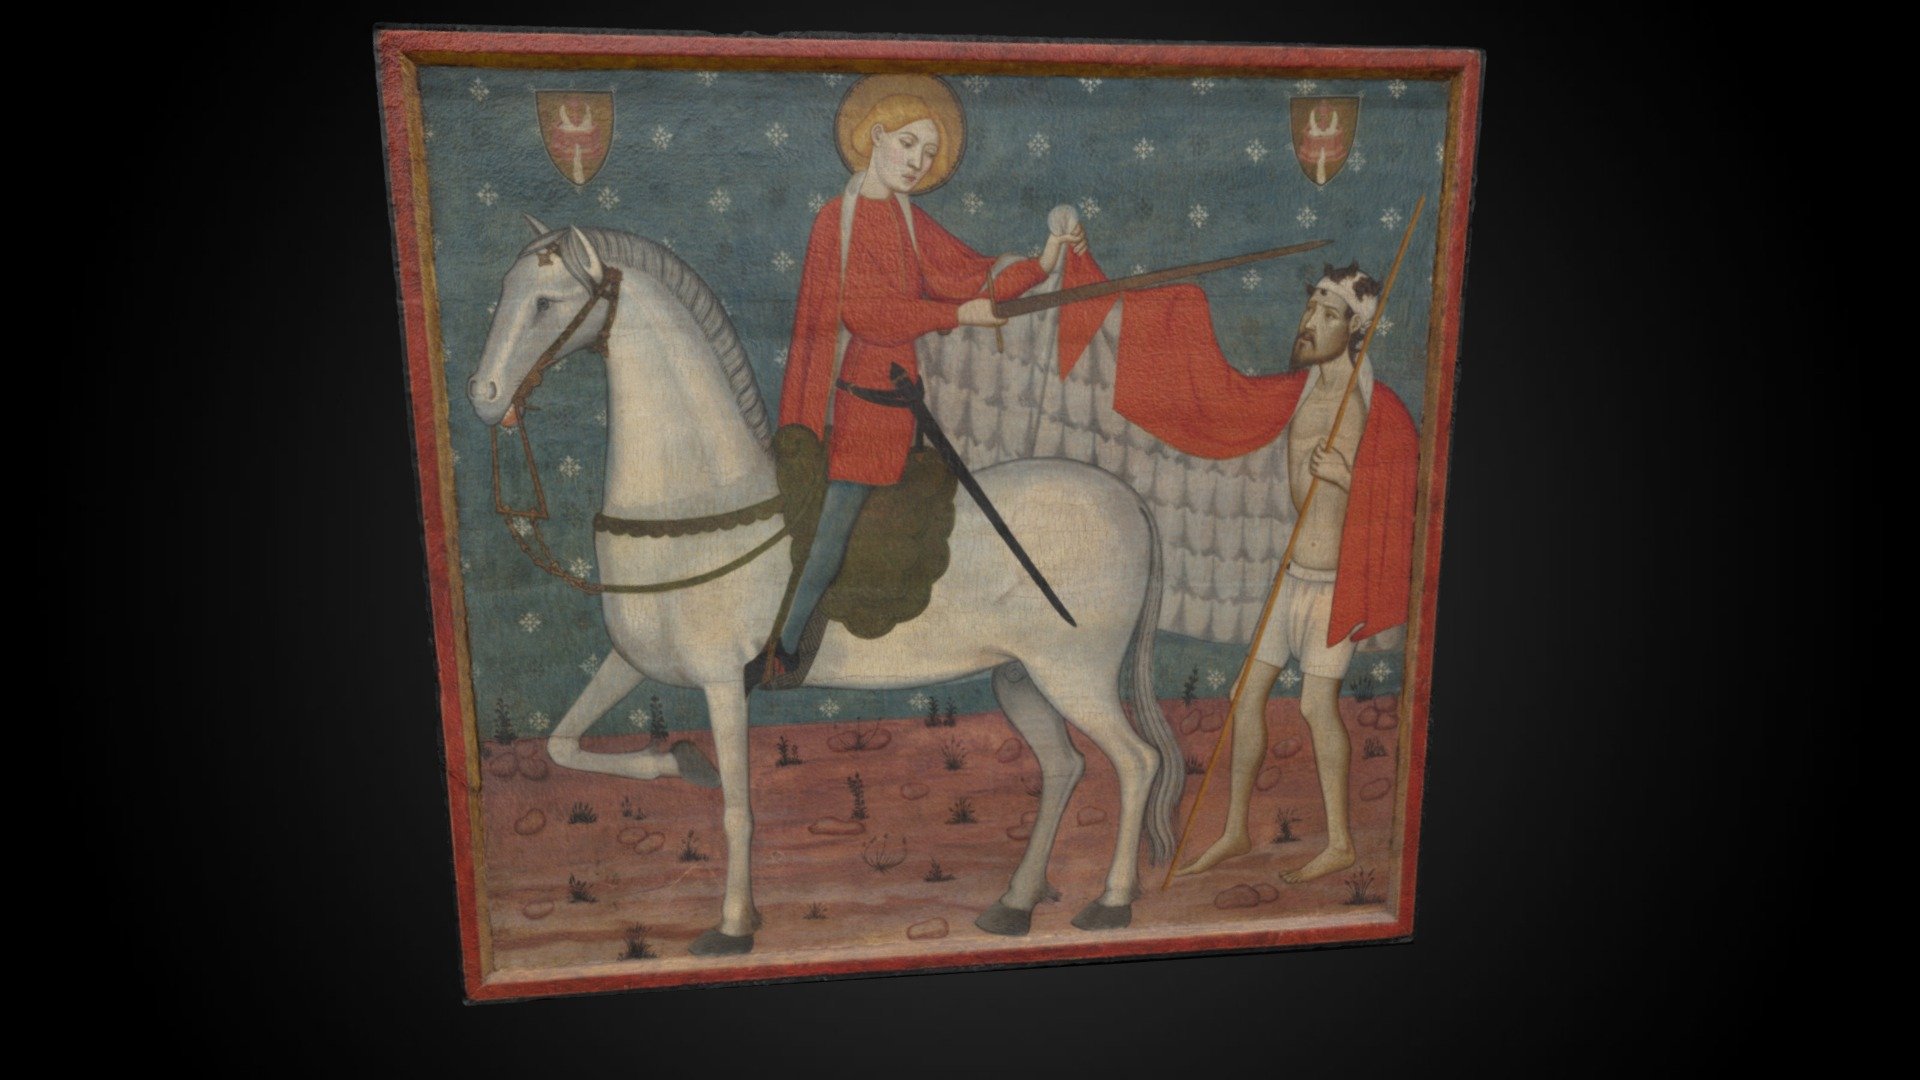 Saint Martin and the Beggar, c. 1375-1385 CE, now in the collection of the Minneapolis Institute of Art.

This large panel, painted by Spanish painter Jaume Serra in the area around present day Barcelona, depicts a celebrated episode from the life of Saint Martin of Tours. 

More information about the painting - Saint Martin and the Beggar, c. 1375-1385 CE - Download Free 3D model by Minneapolis Institute of Art (@artsmia) 3d model